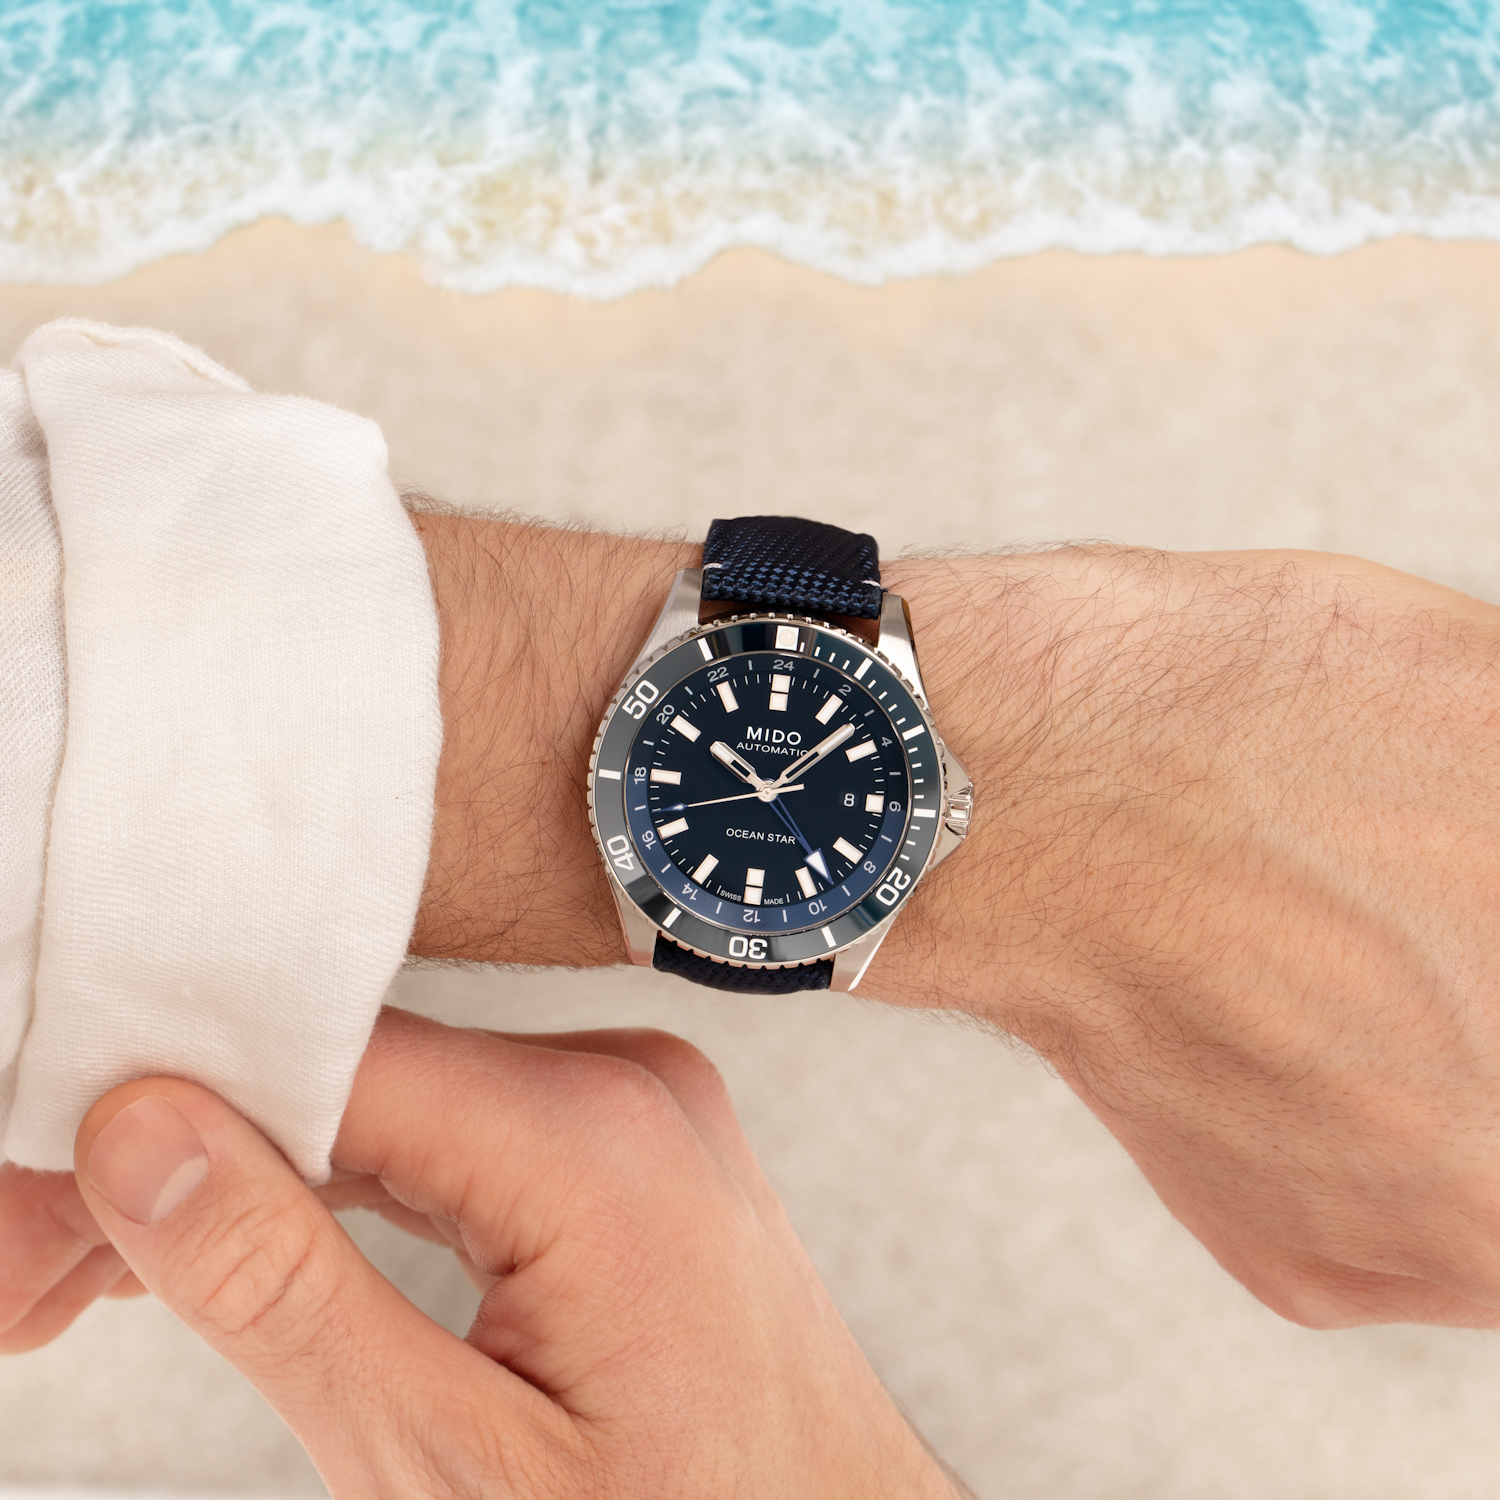 Mido Ocean Star GMT Timeandwatches.pl